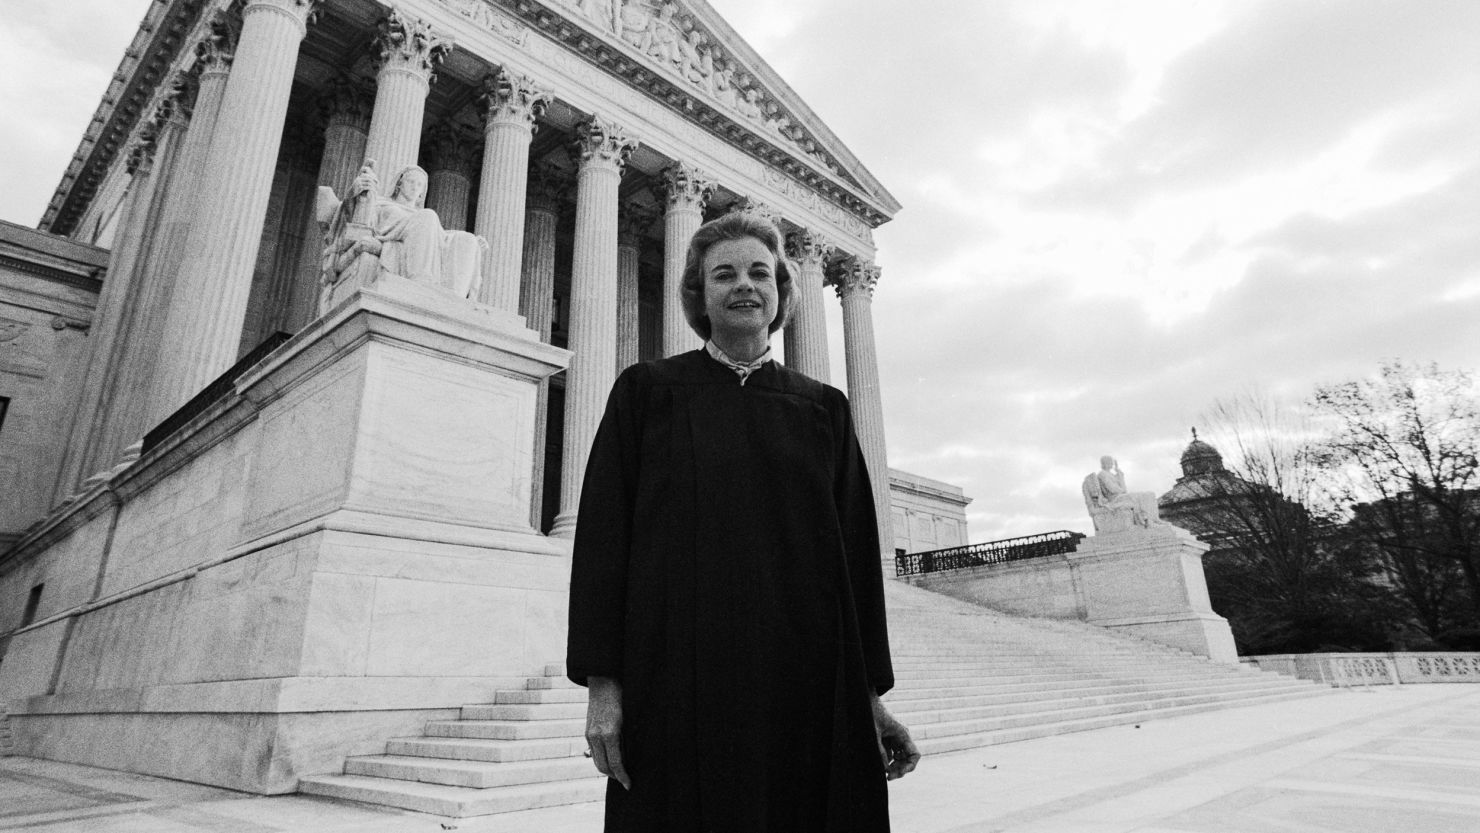 Newly appointed Supreme Court Justice Sandra Day O'Connor stands in front of the US Supreme Court Building following her being sworn in, September 25, 1981, in Washington, DC.